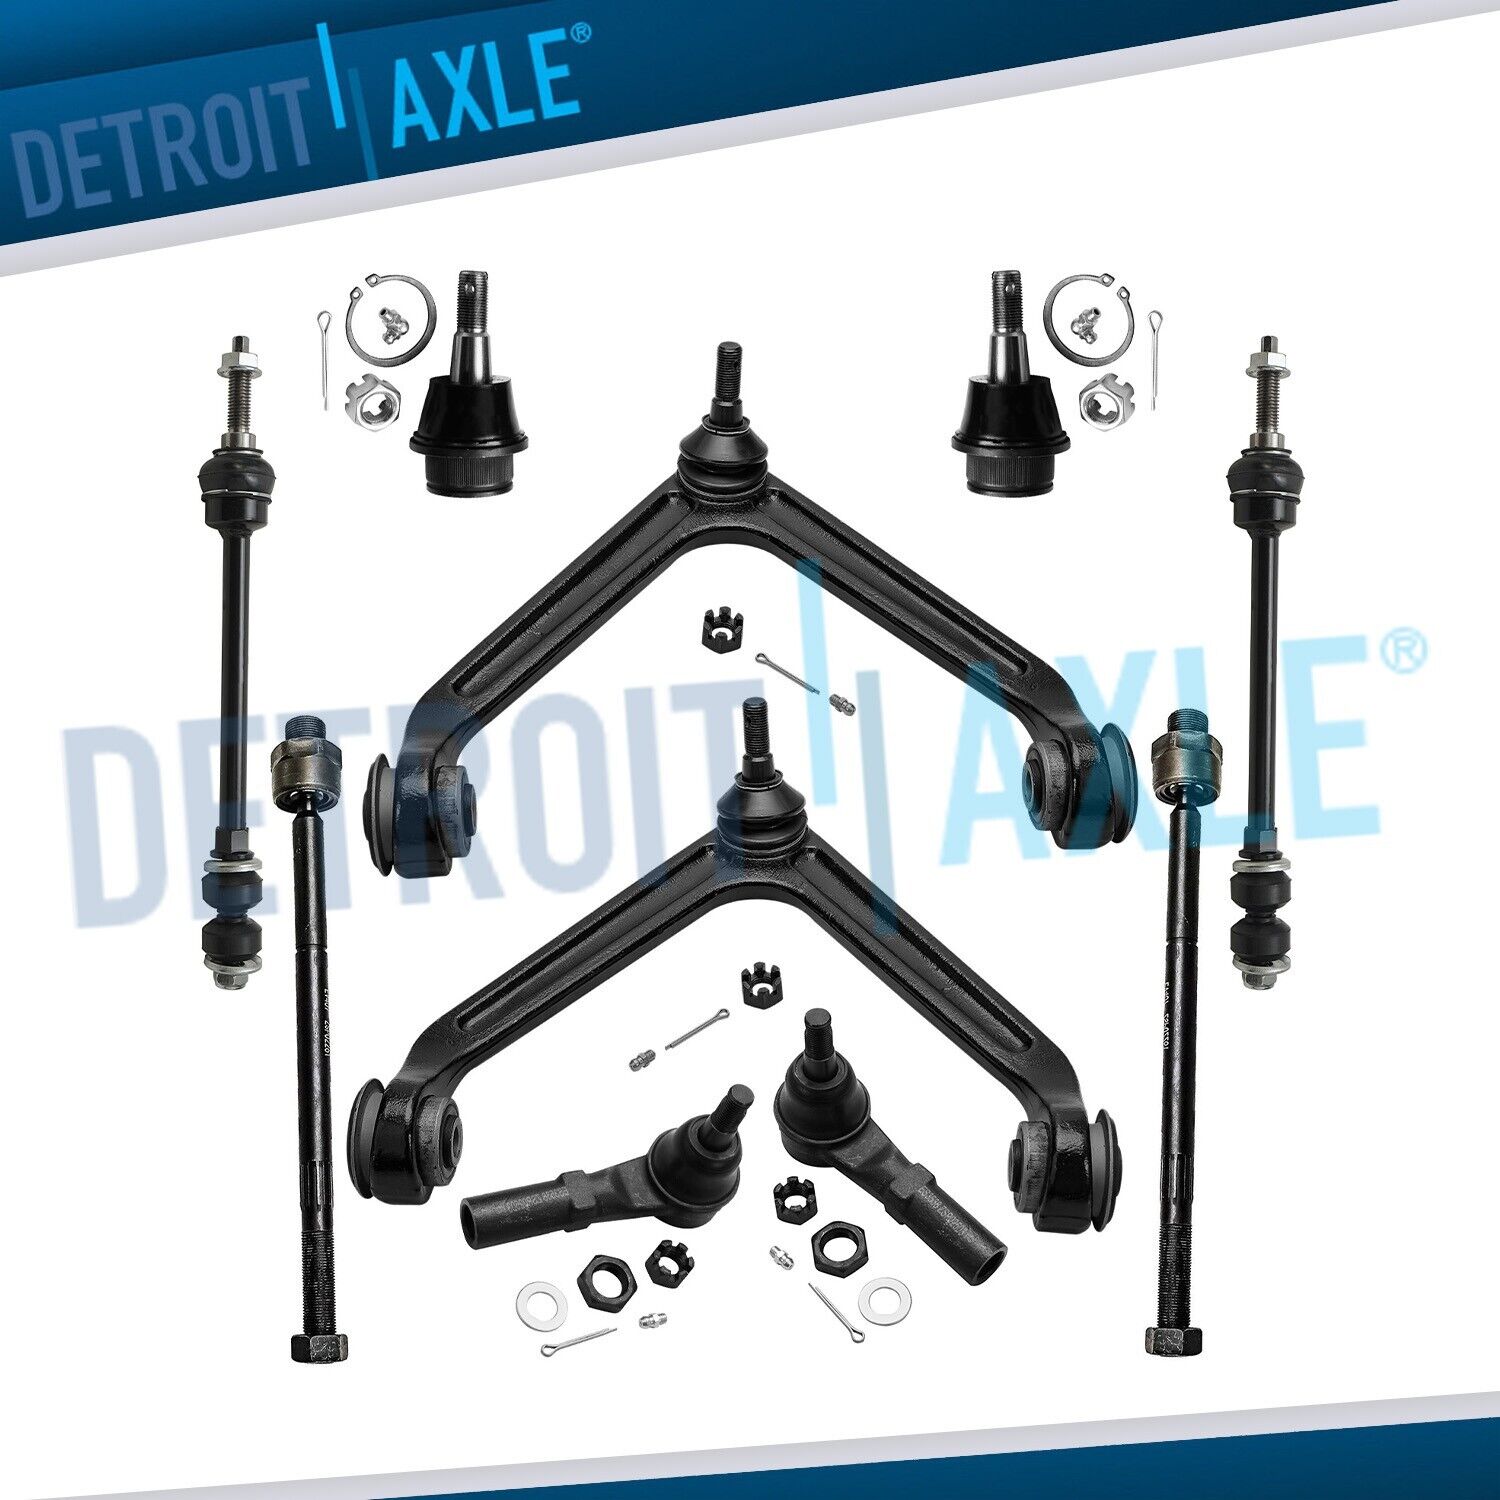 Front Upper Control Arm Tierod kit for 2002 2003 2004 2005 Dodge Ram 1500 4x4